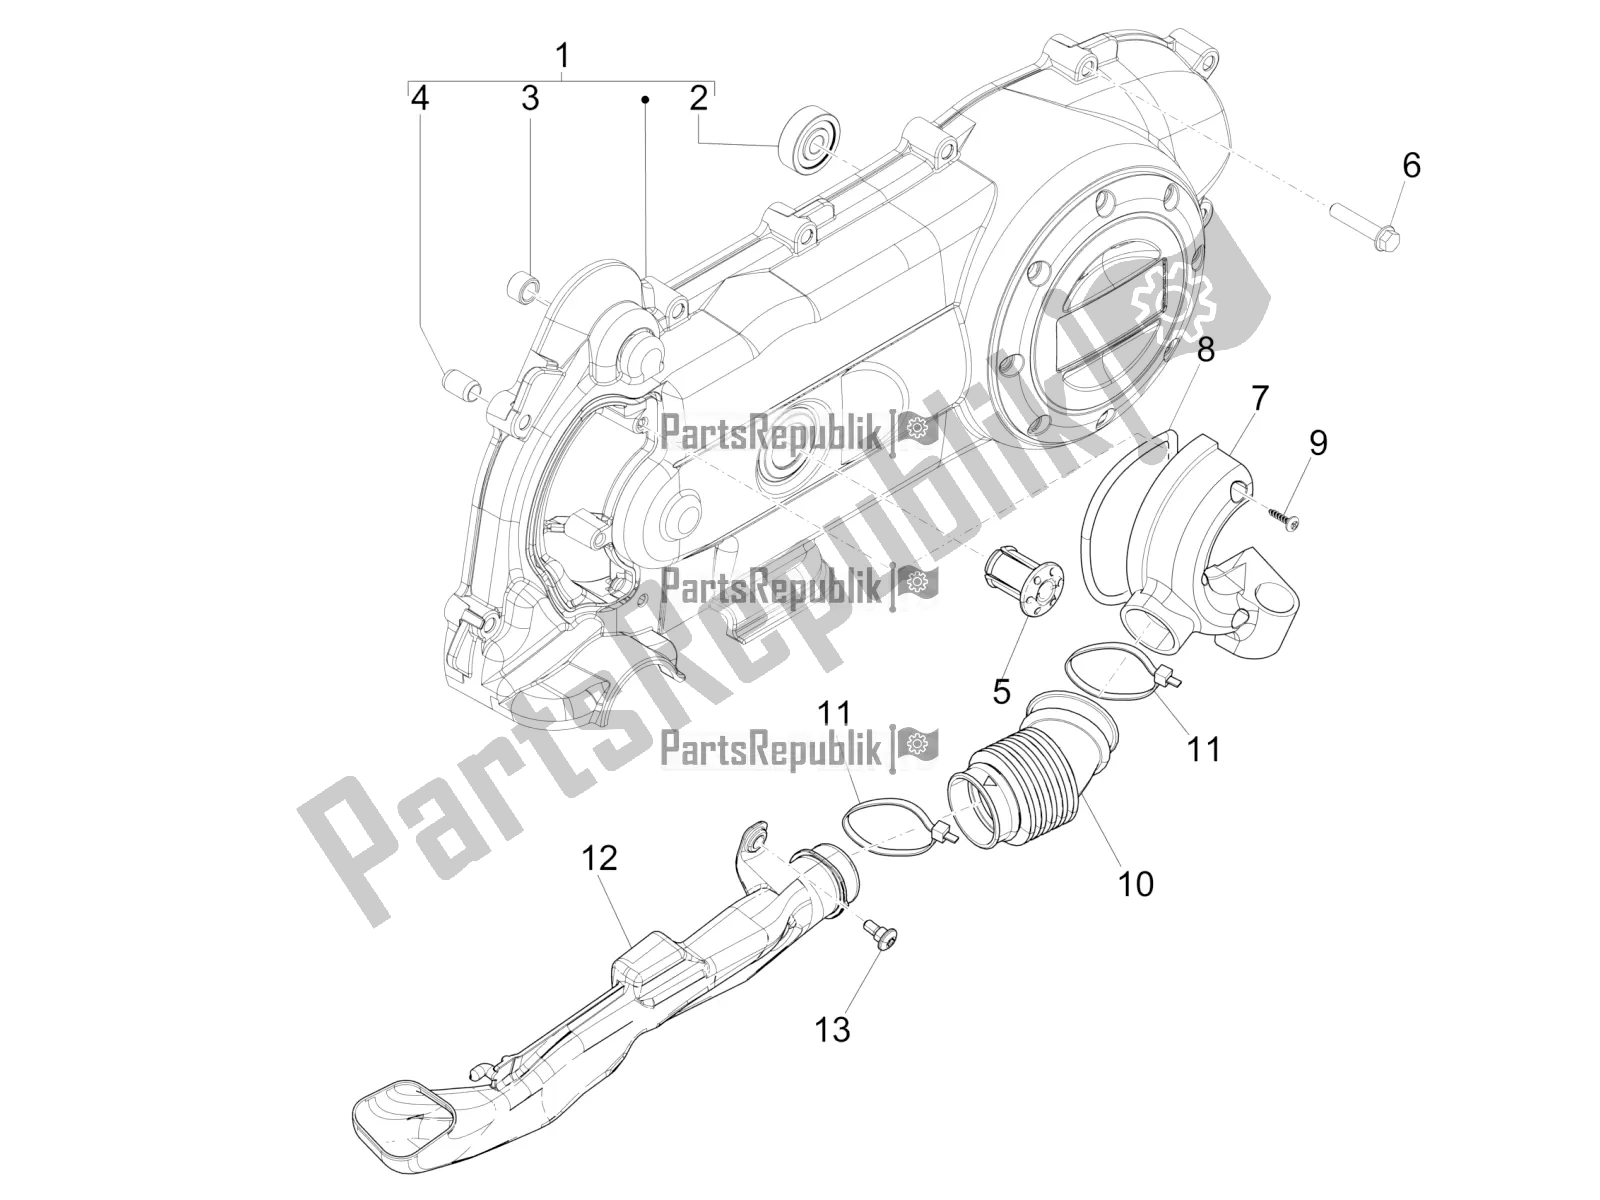 All parts for the Crankcase Cover - Crankcase Cooling of the Piaggio Liberty 50 Iget 4T USA 2018